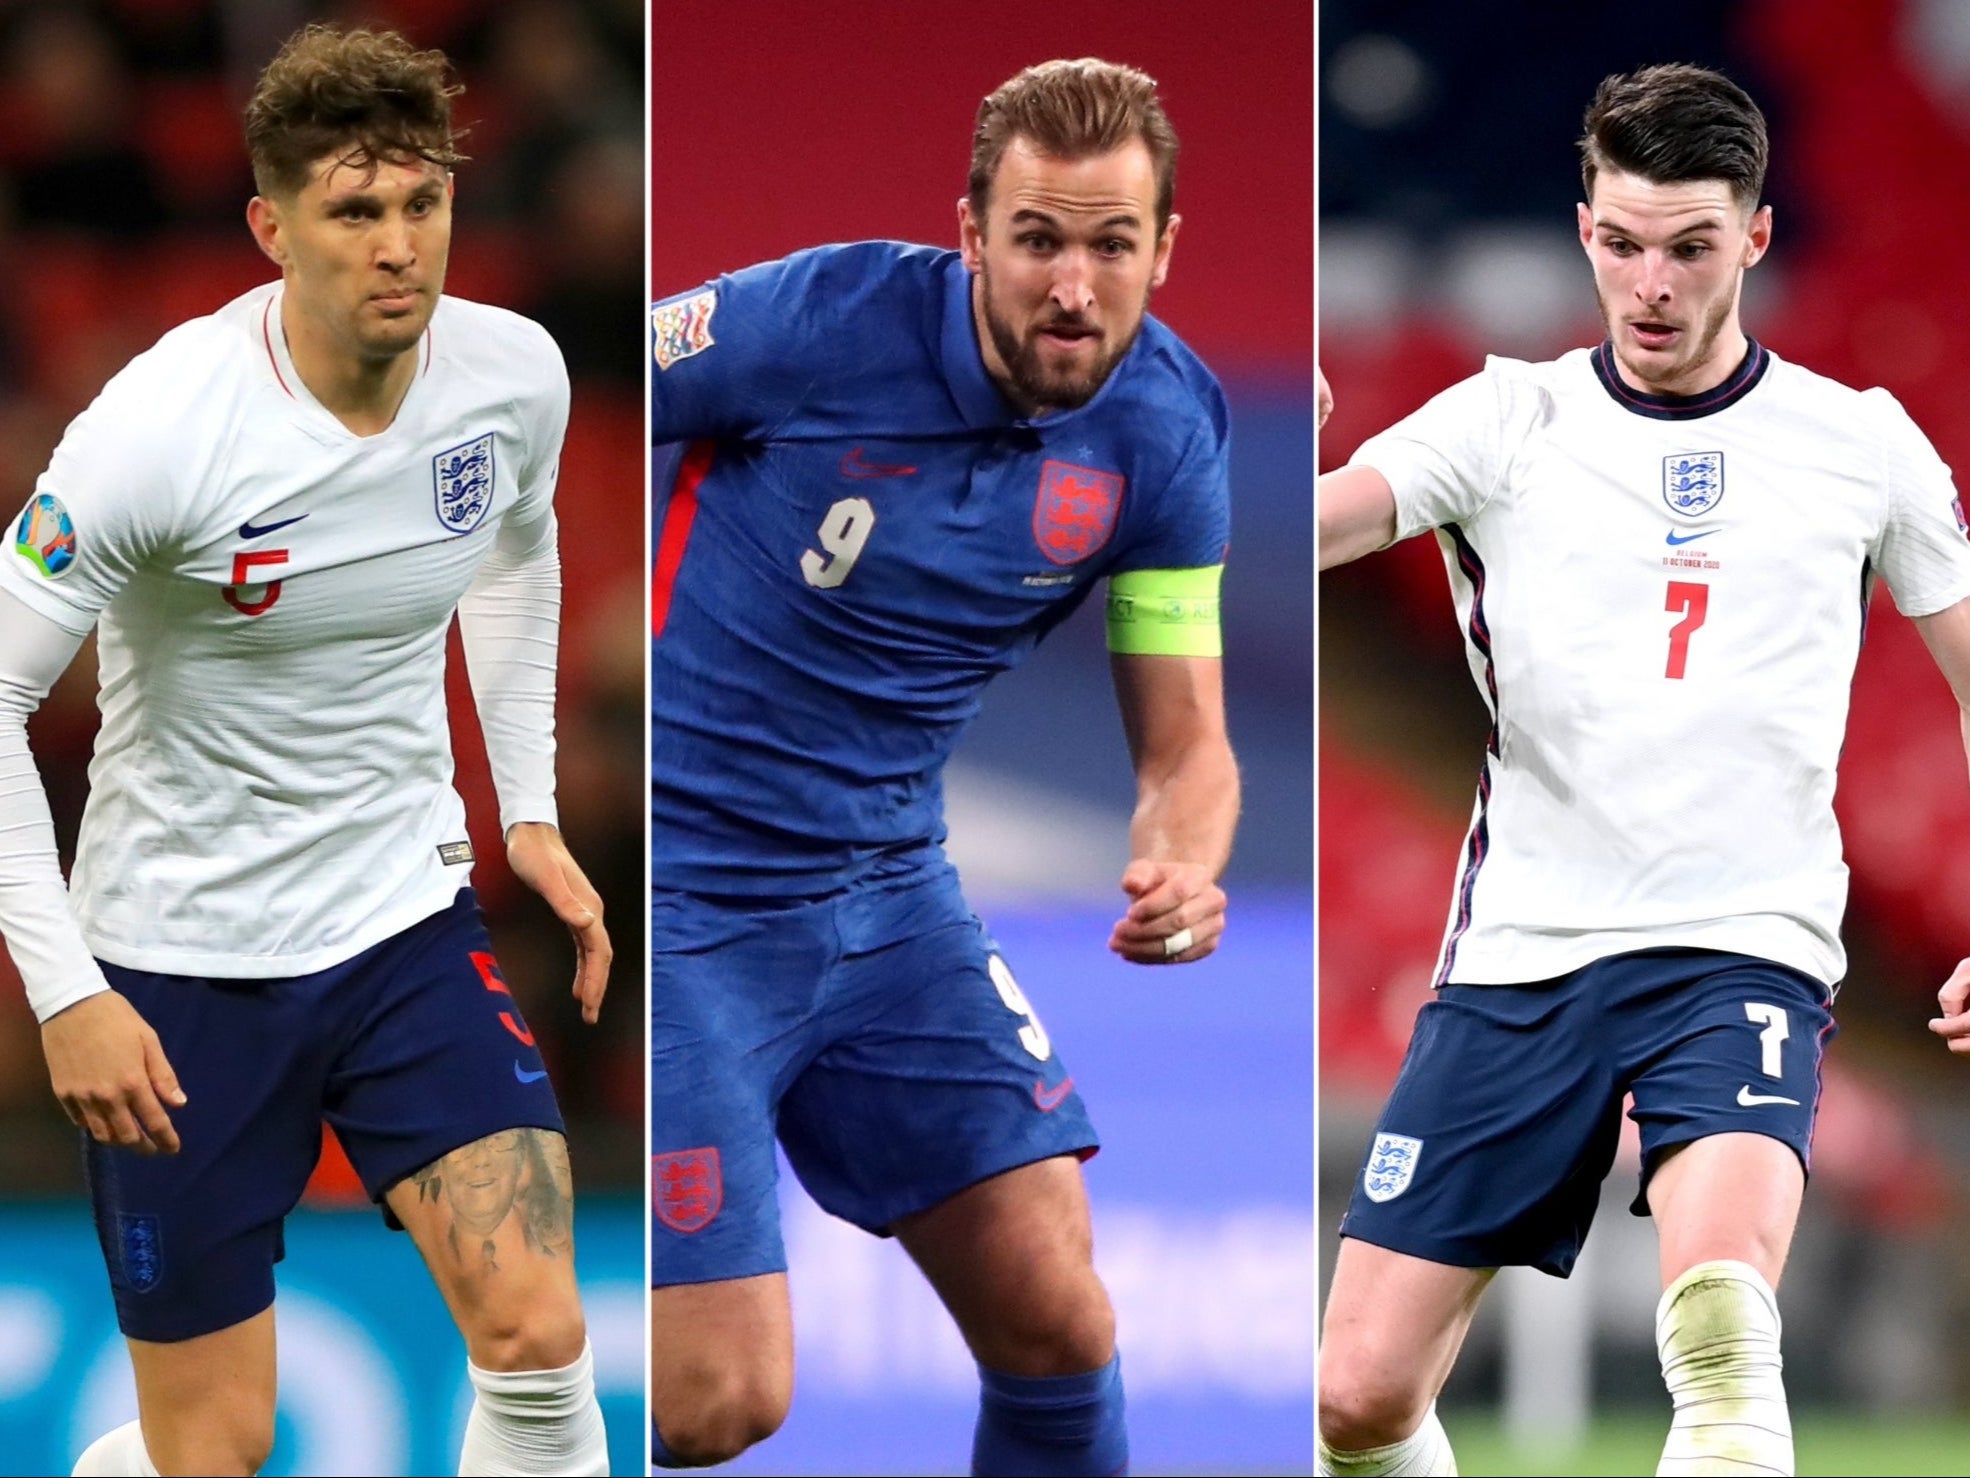 John Stones, Harry Kane and Declan Rice will all be aiming to start England's Euro 2020 campaign with a bang